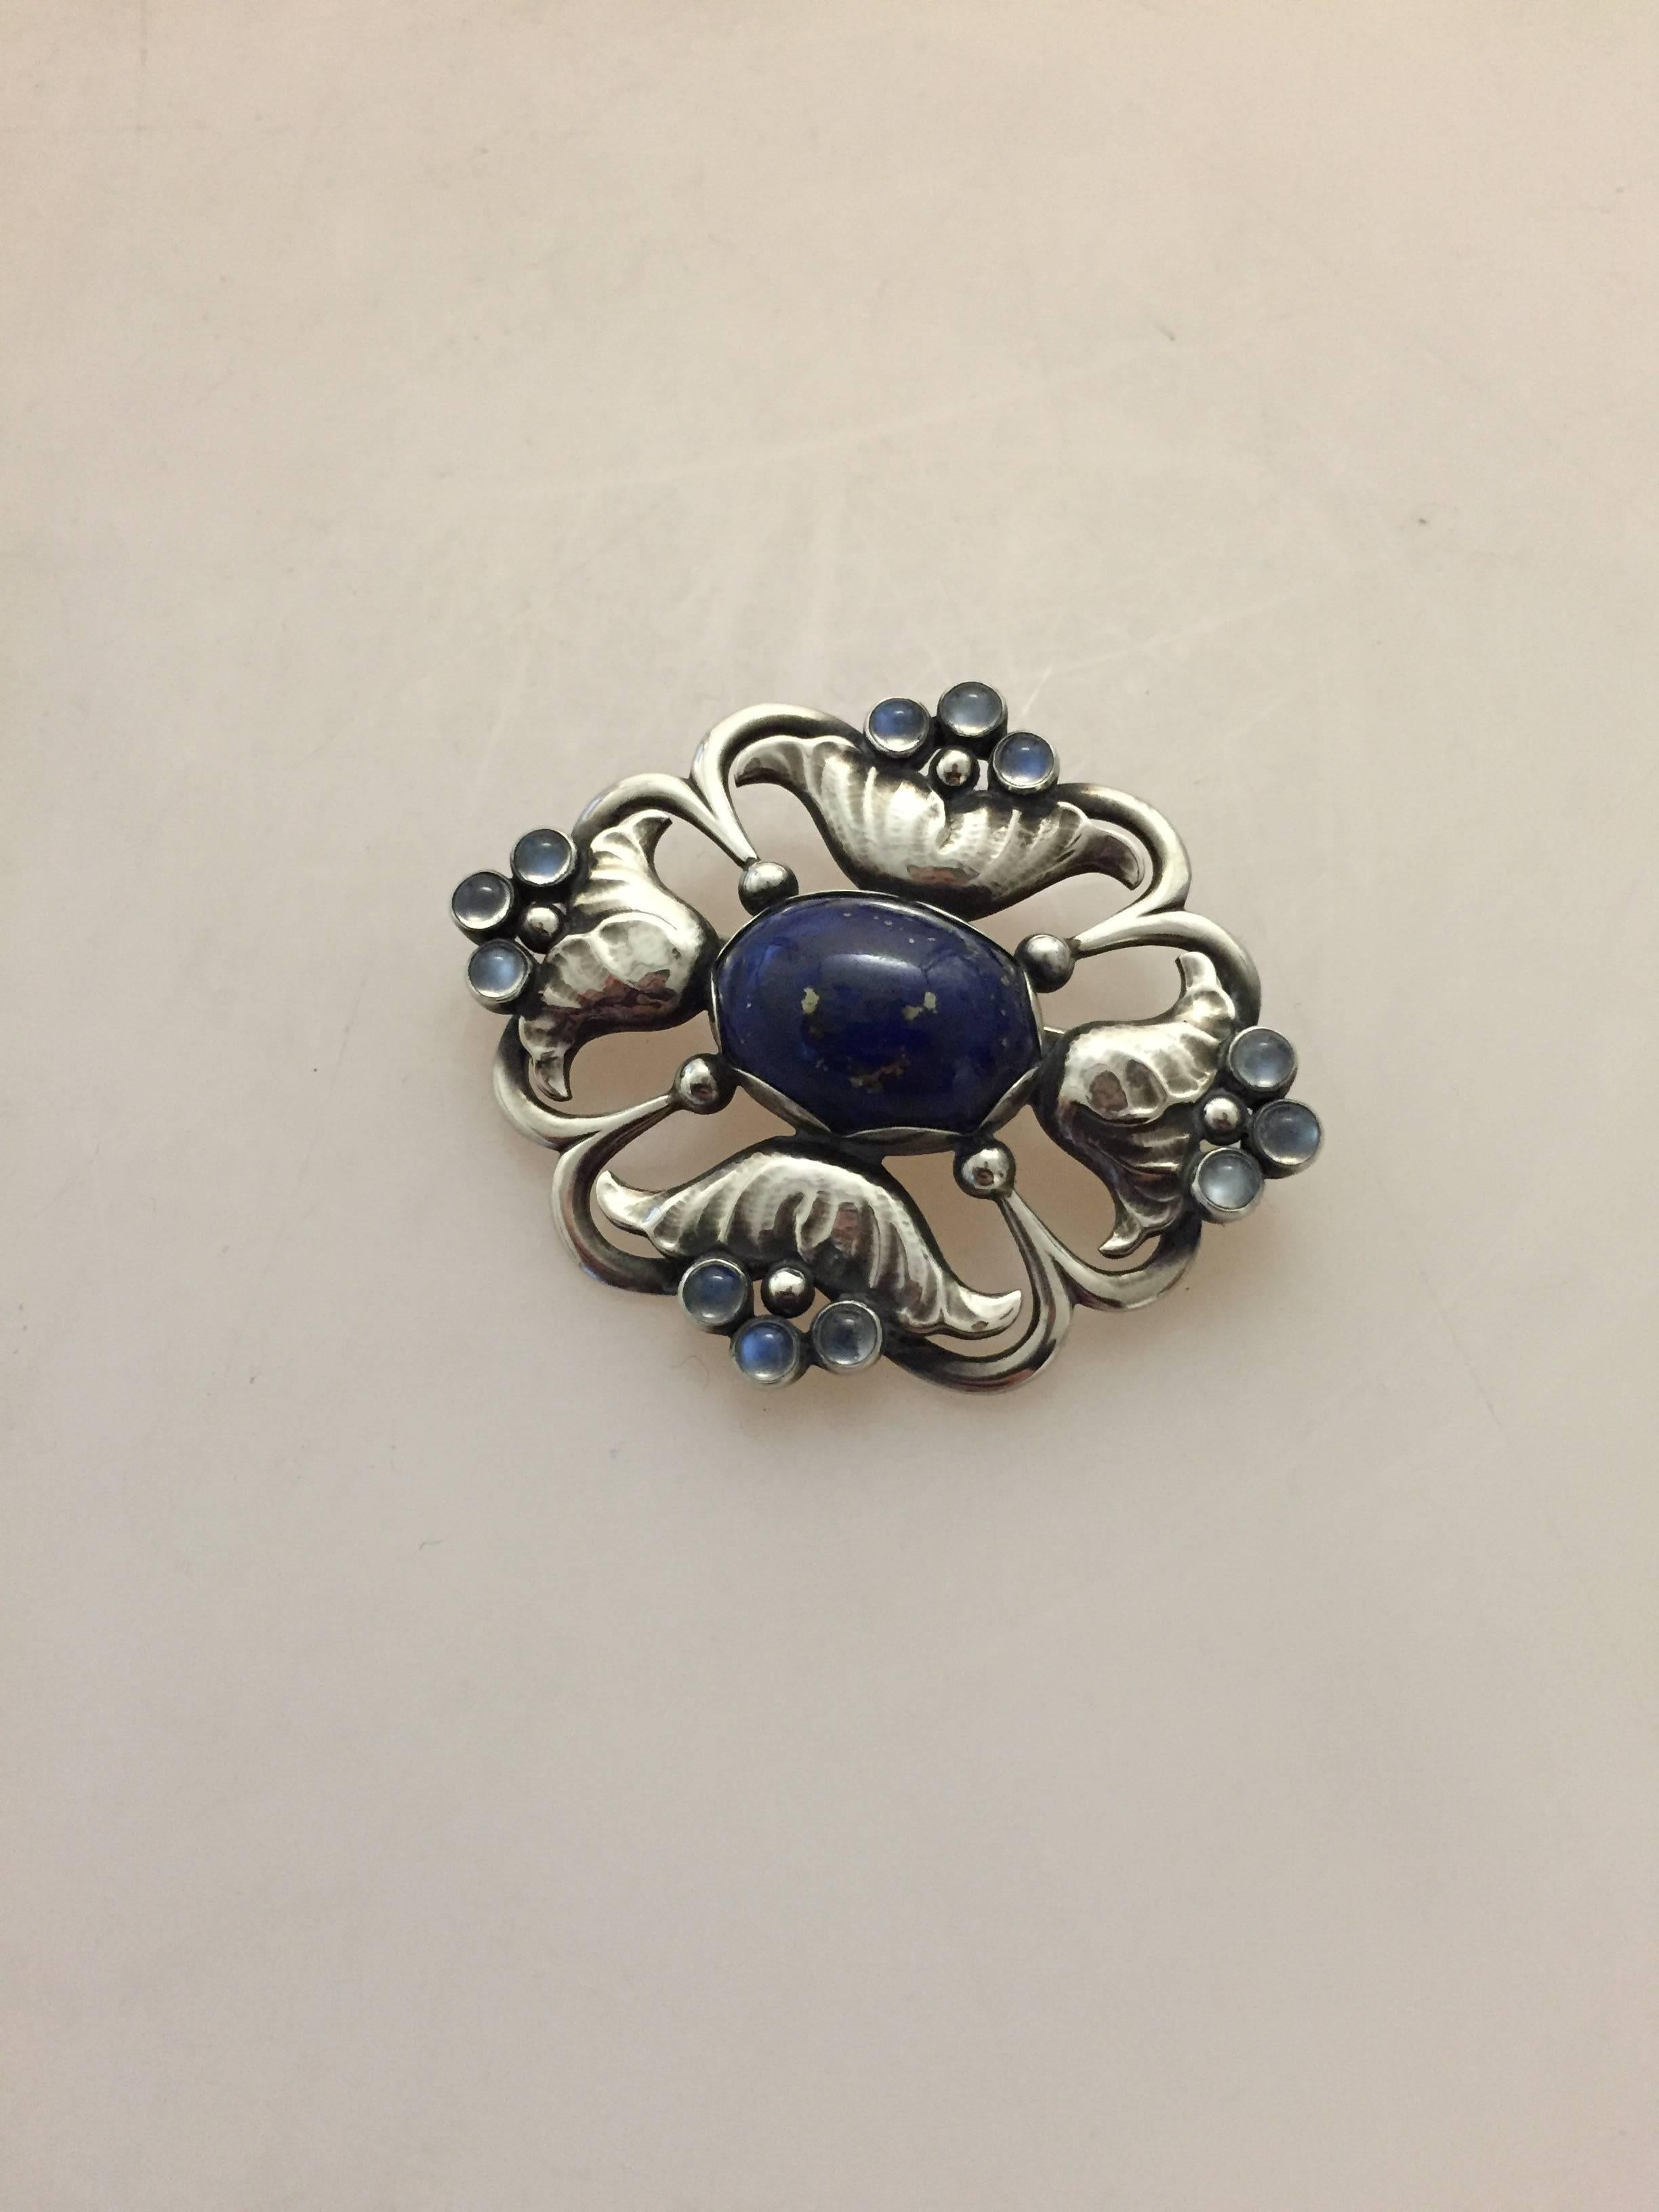 Danish Georg Jensen Sterling Silver Brooch with Lapis Lazuli and Moonstones #173